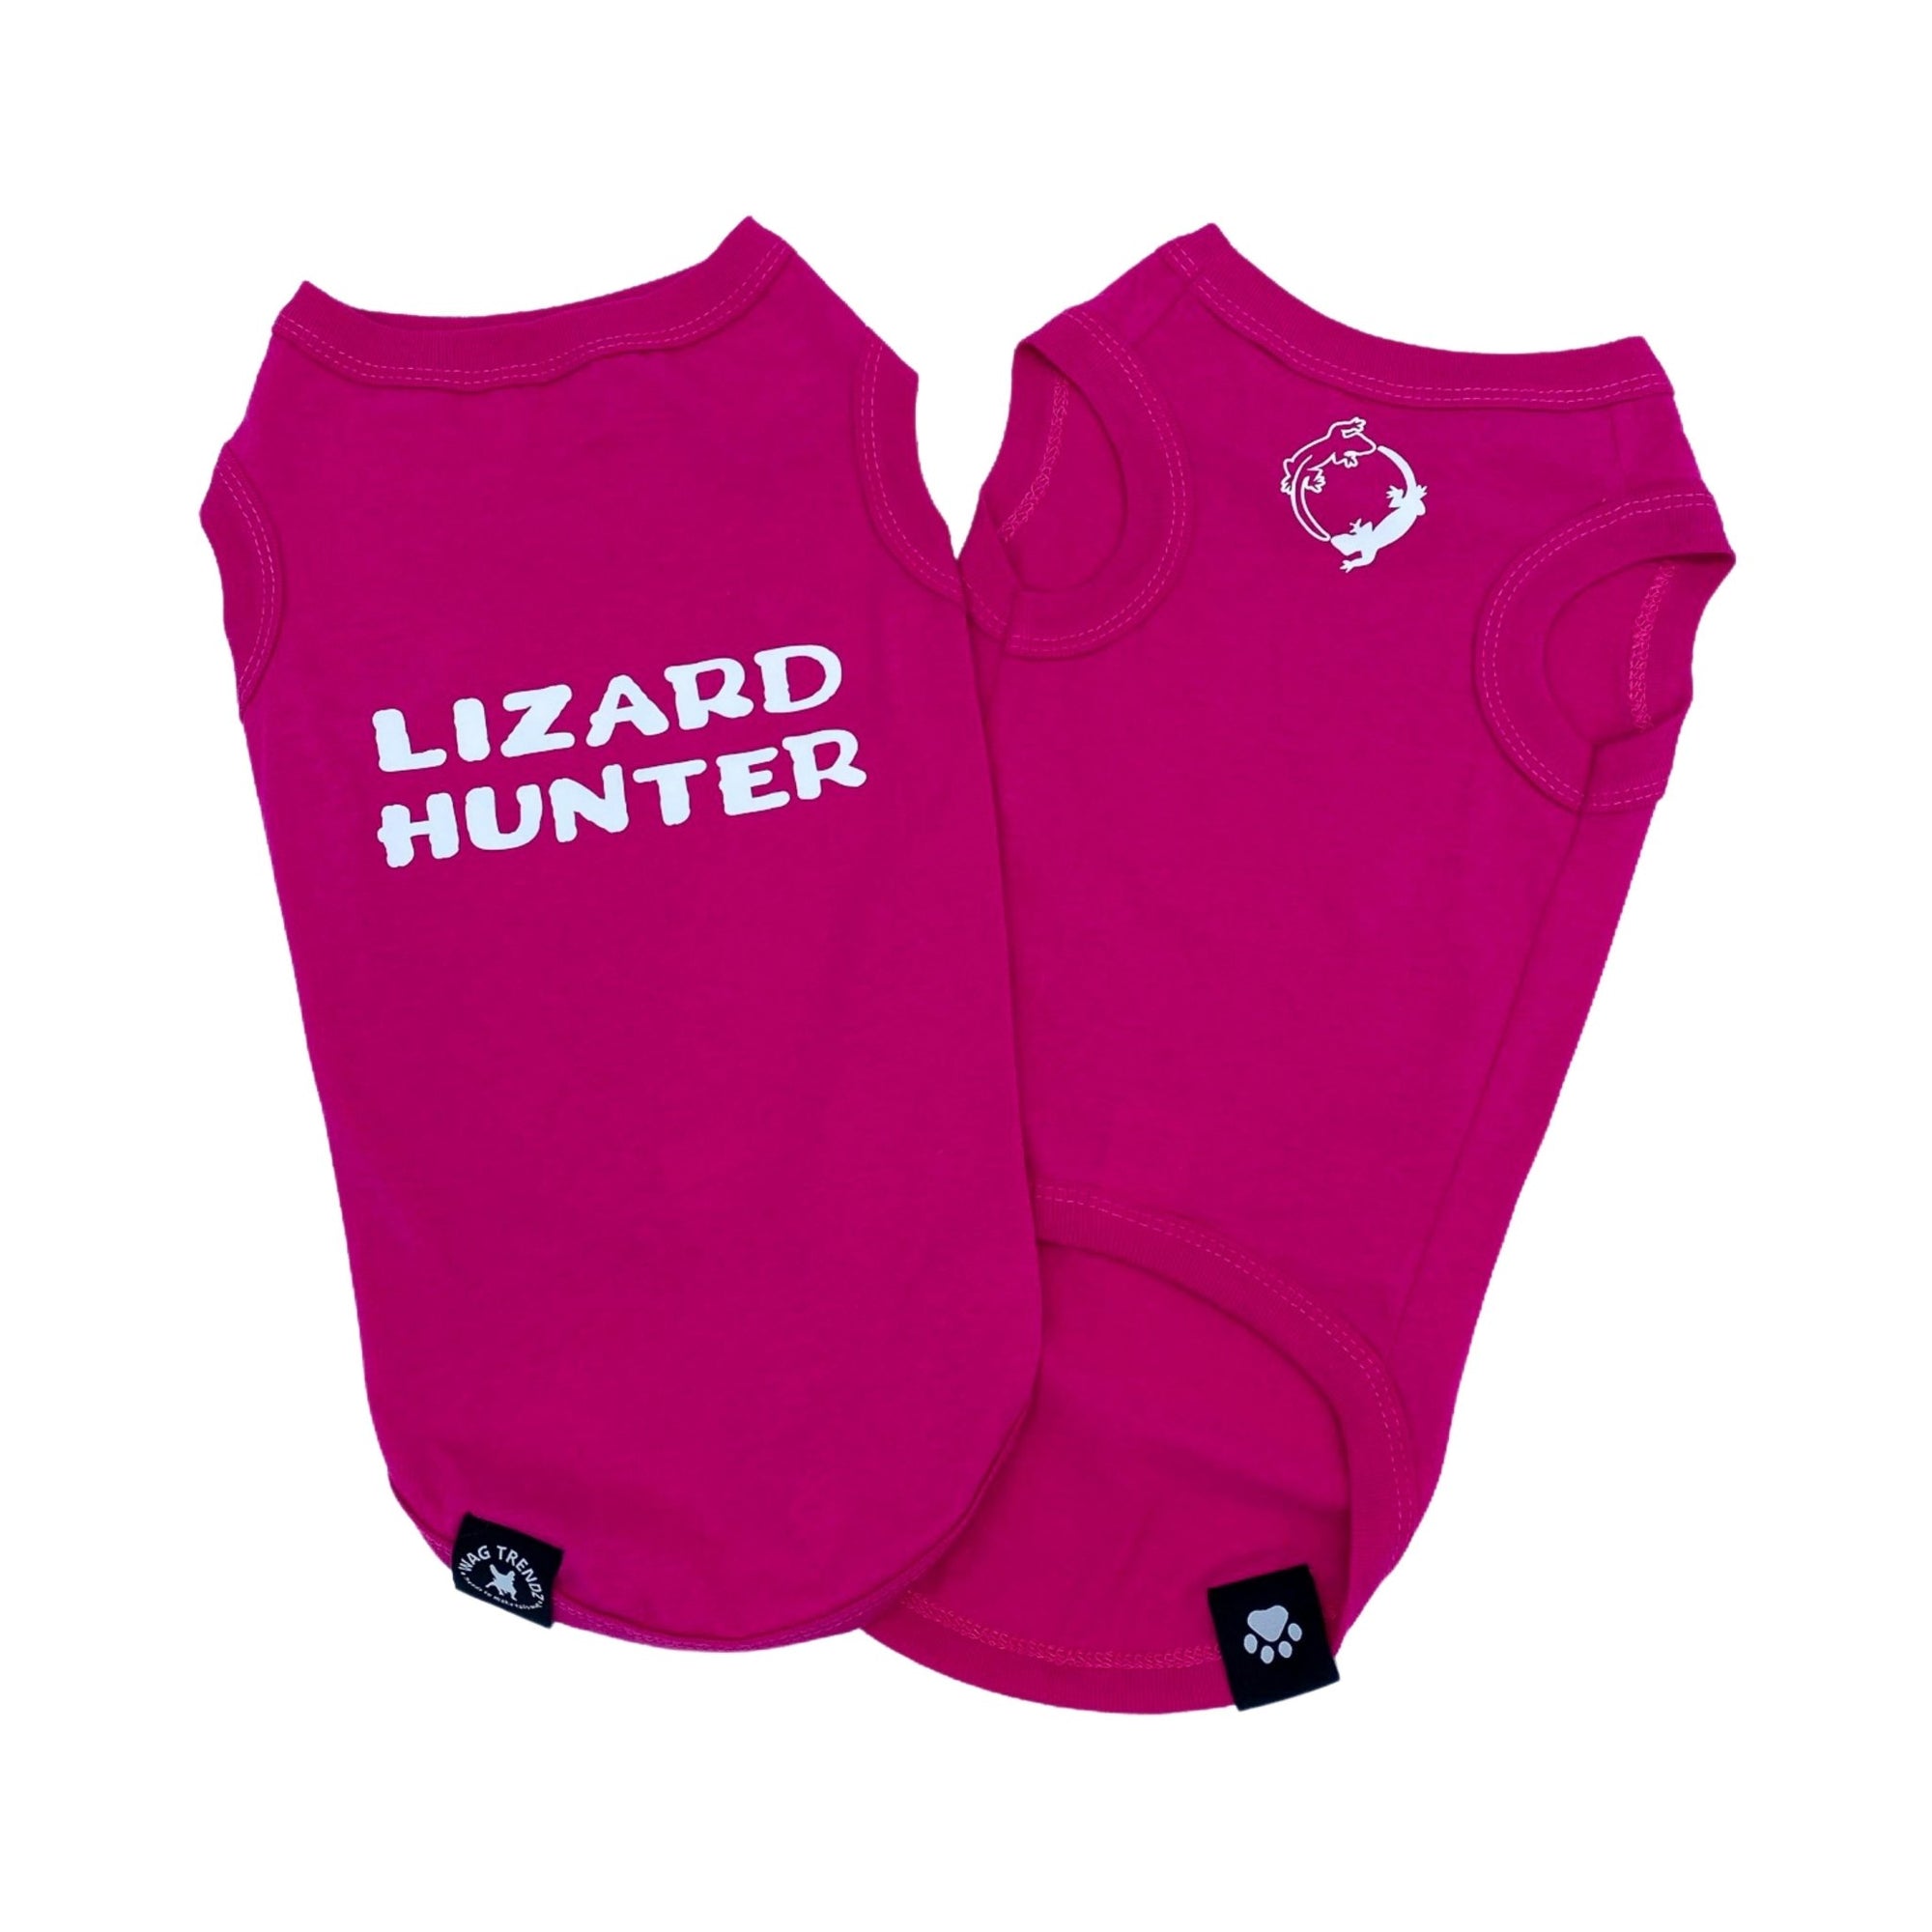 Dog T-Shirt - &quot;Lizard Hunter&quot; - Hot Pink dog t-shirts - back view with Lizard Hunter lettering in white and chest view with lizards making a circle emoji - against solid white background - Wag Trendz